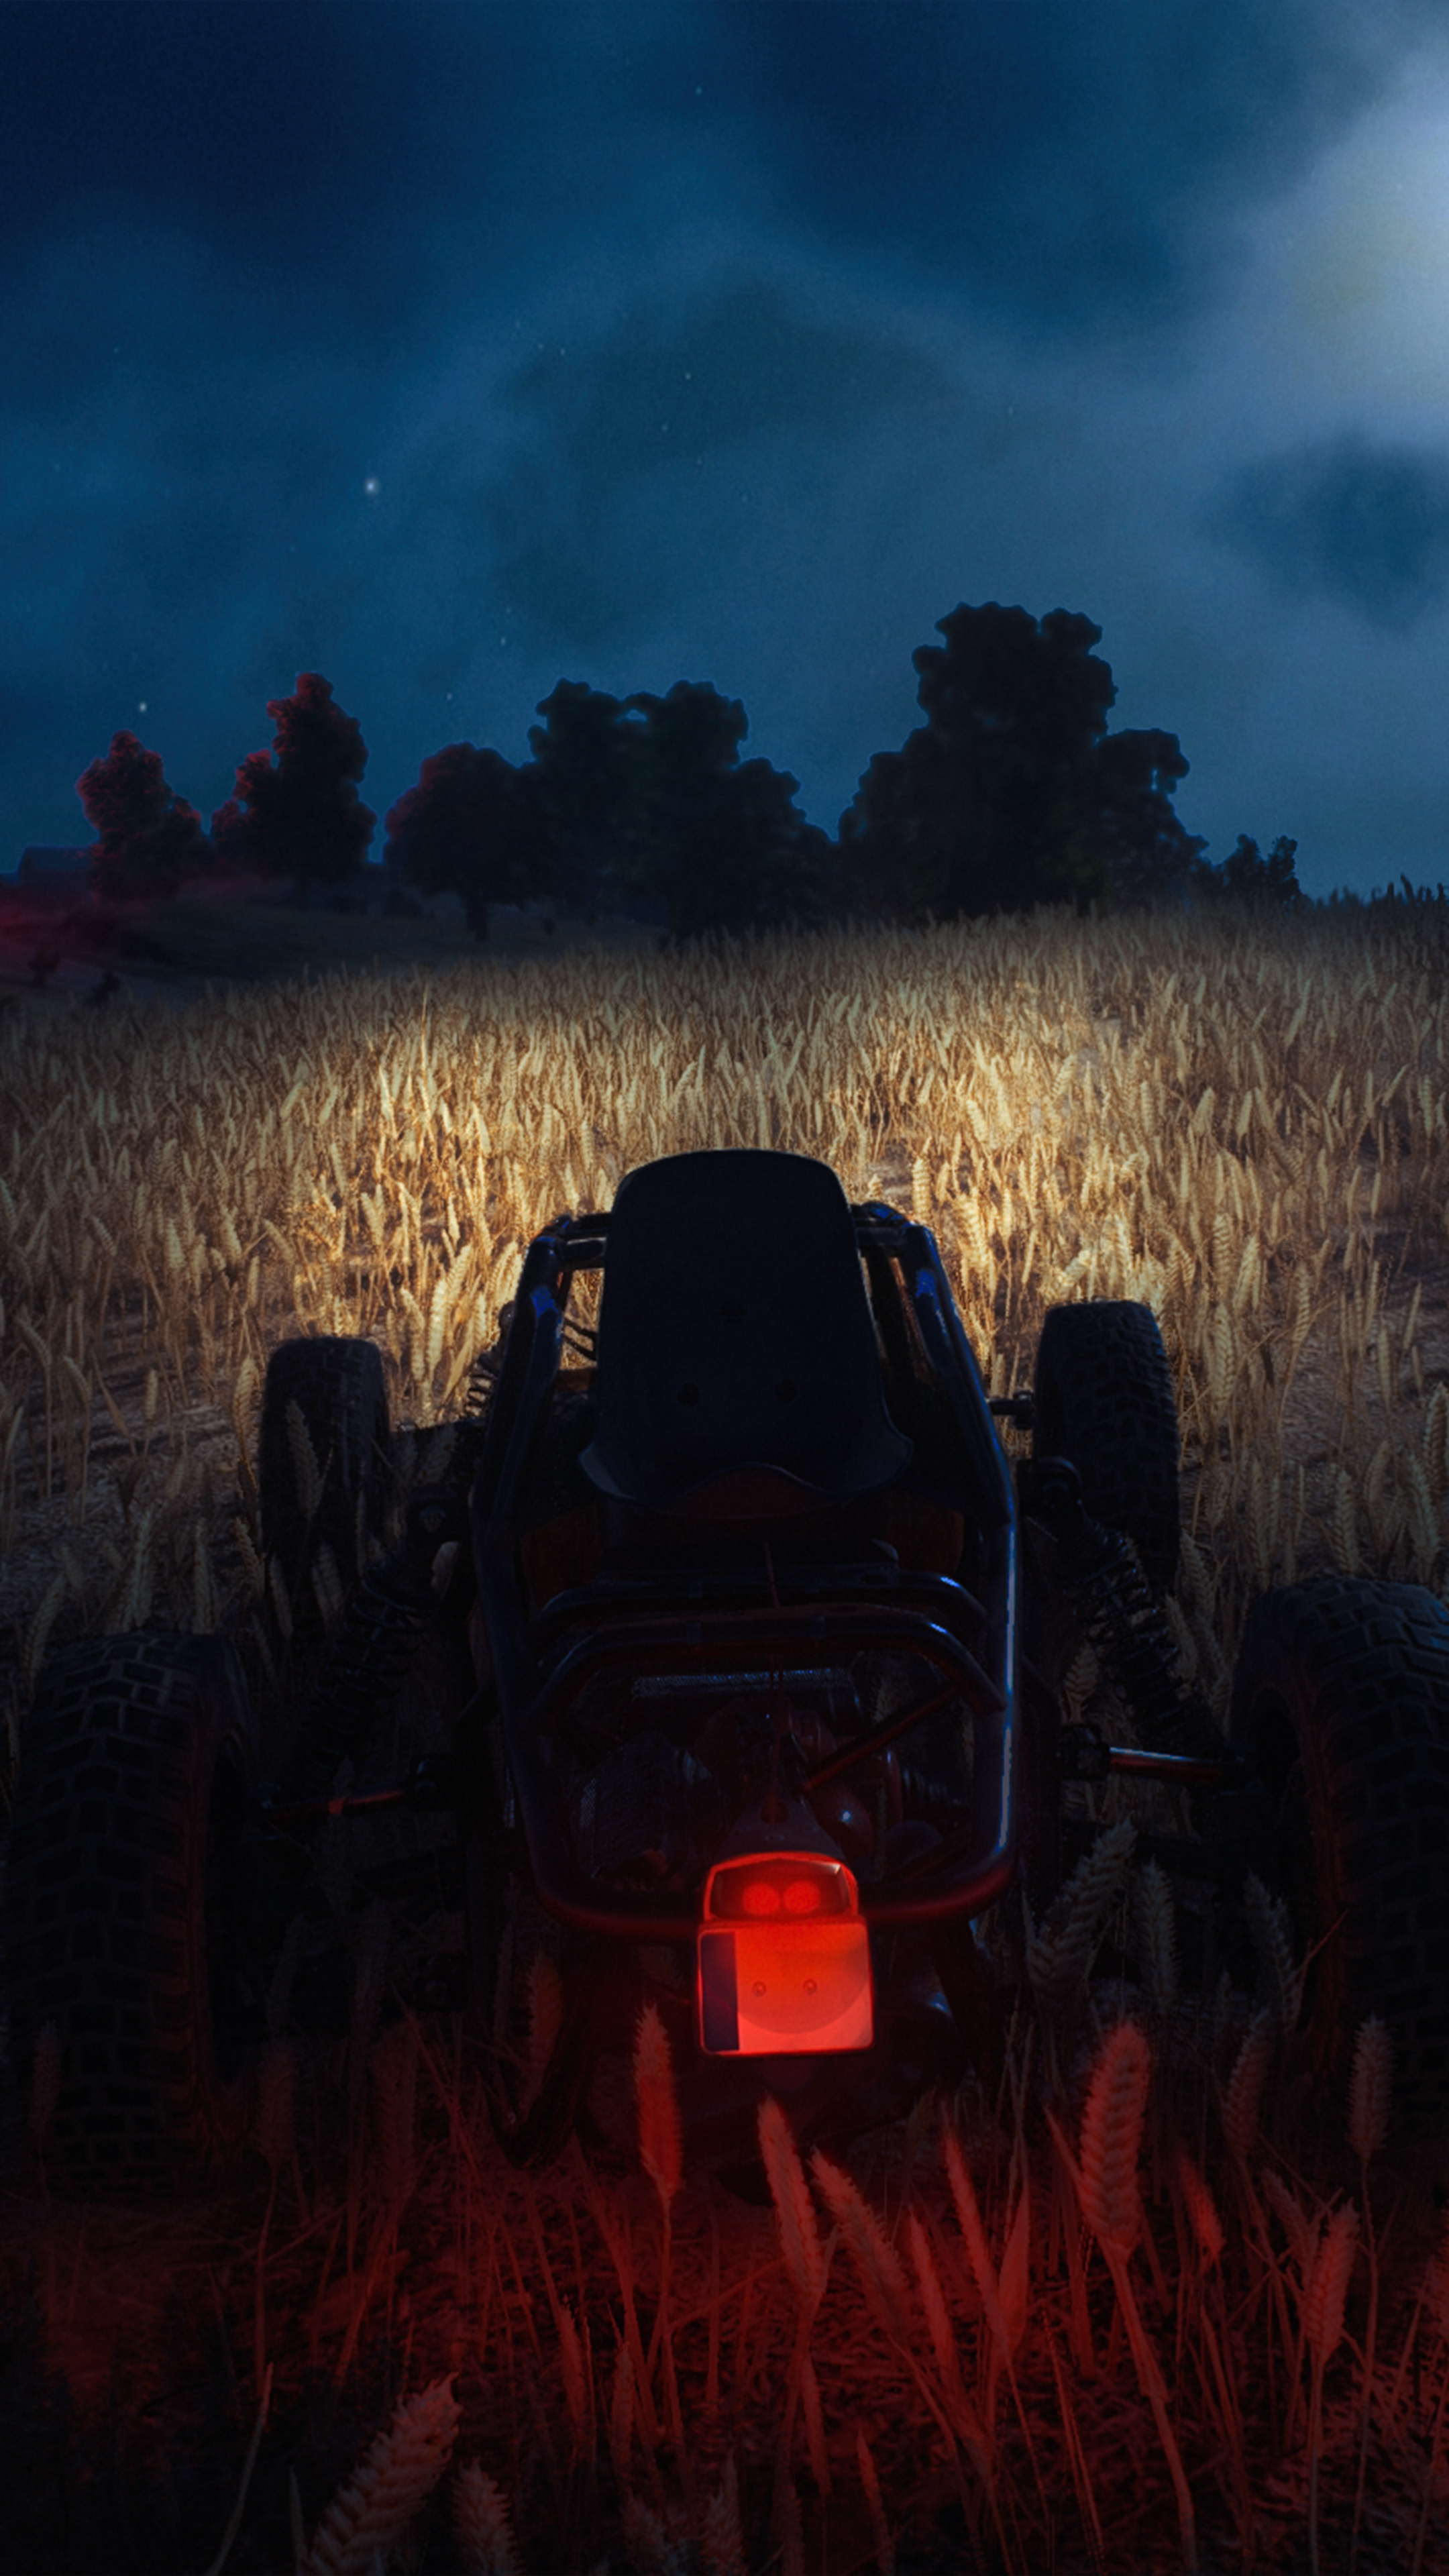 night wallpaper hd for mobile,sky,grass,night,field,vehicle